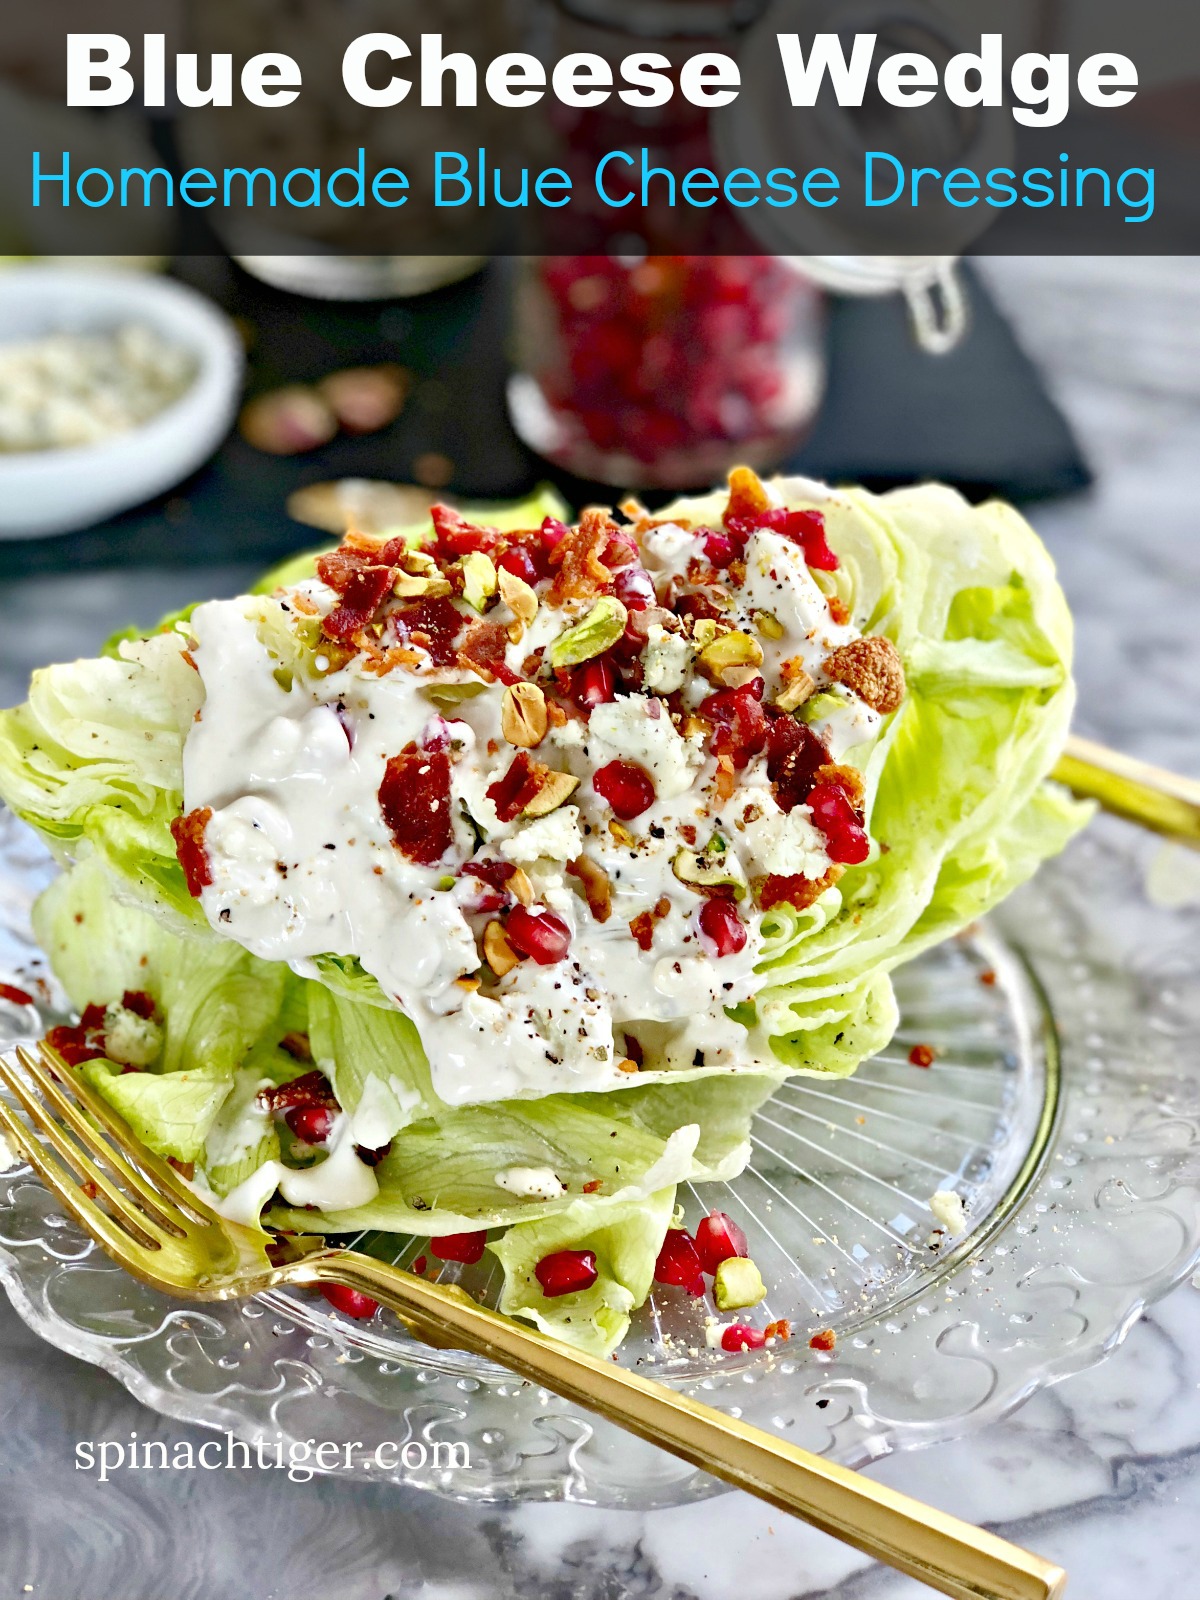 Wedge Salad with Homemade Blue Cheese Dressing 